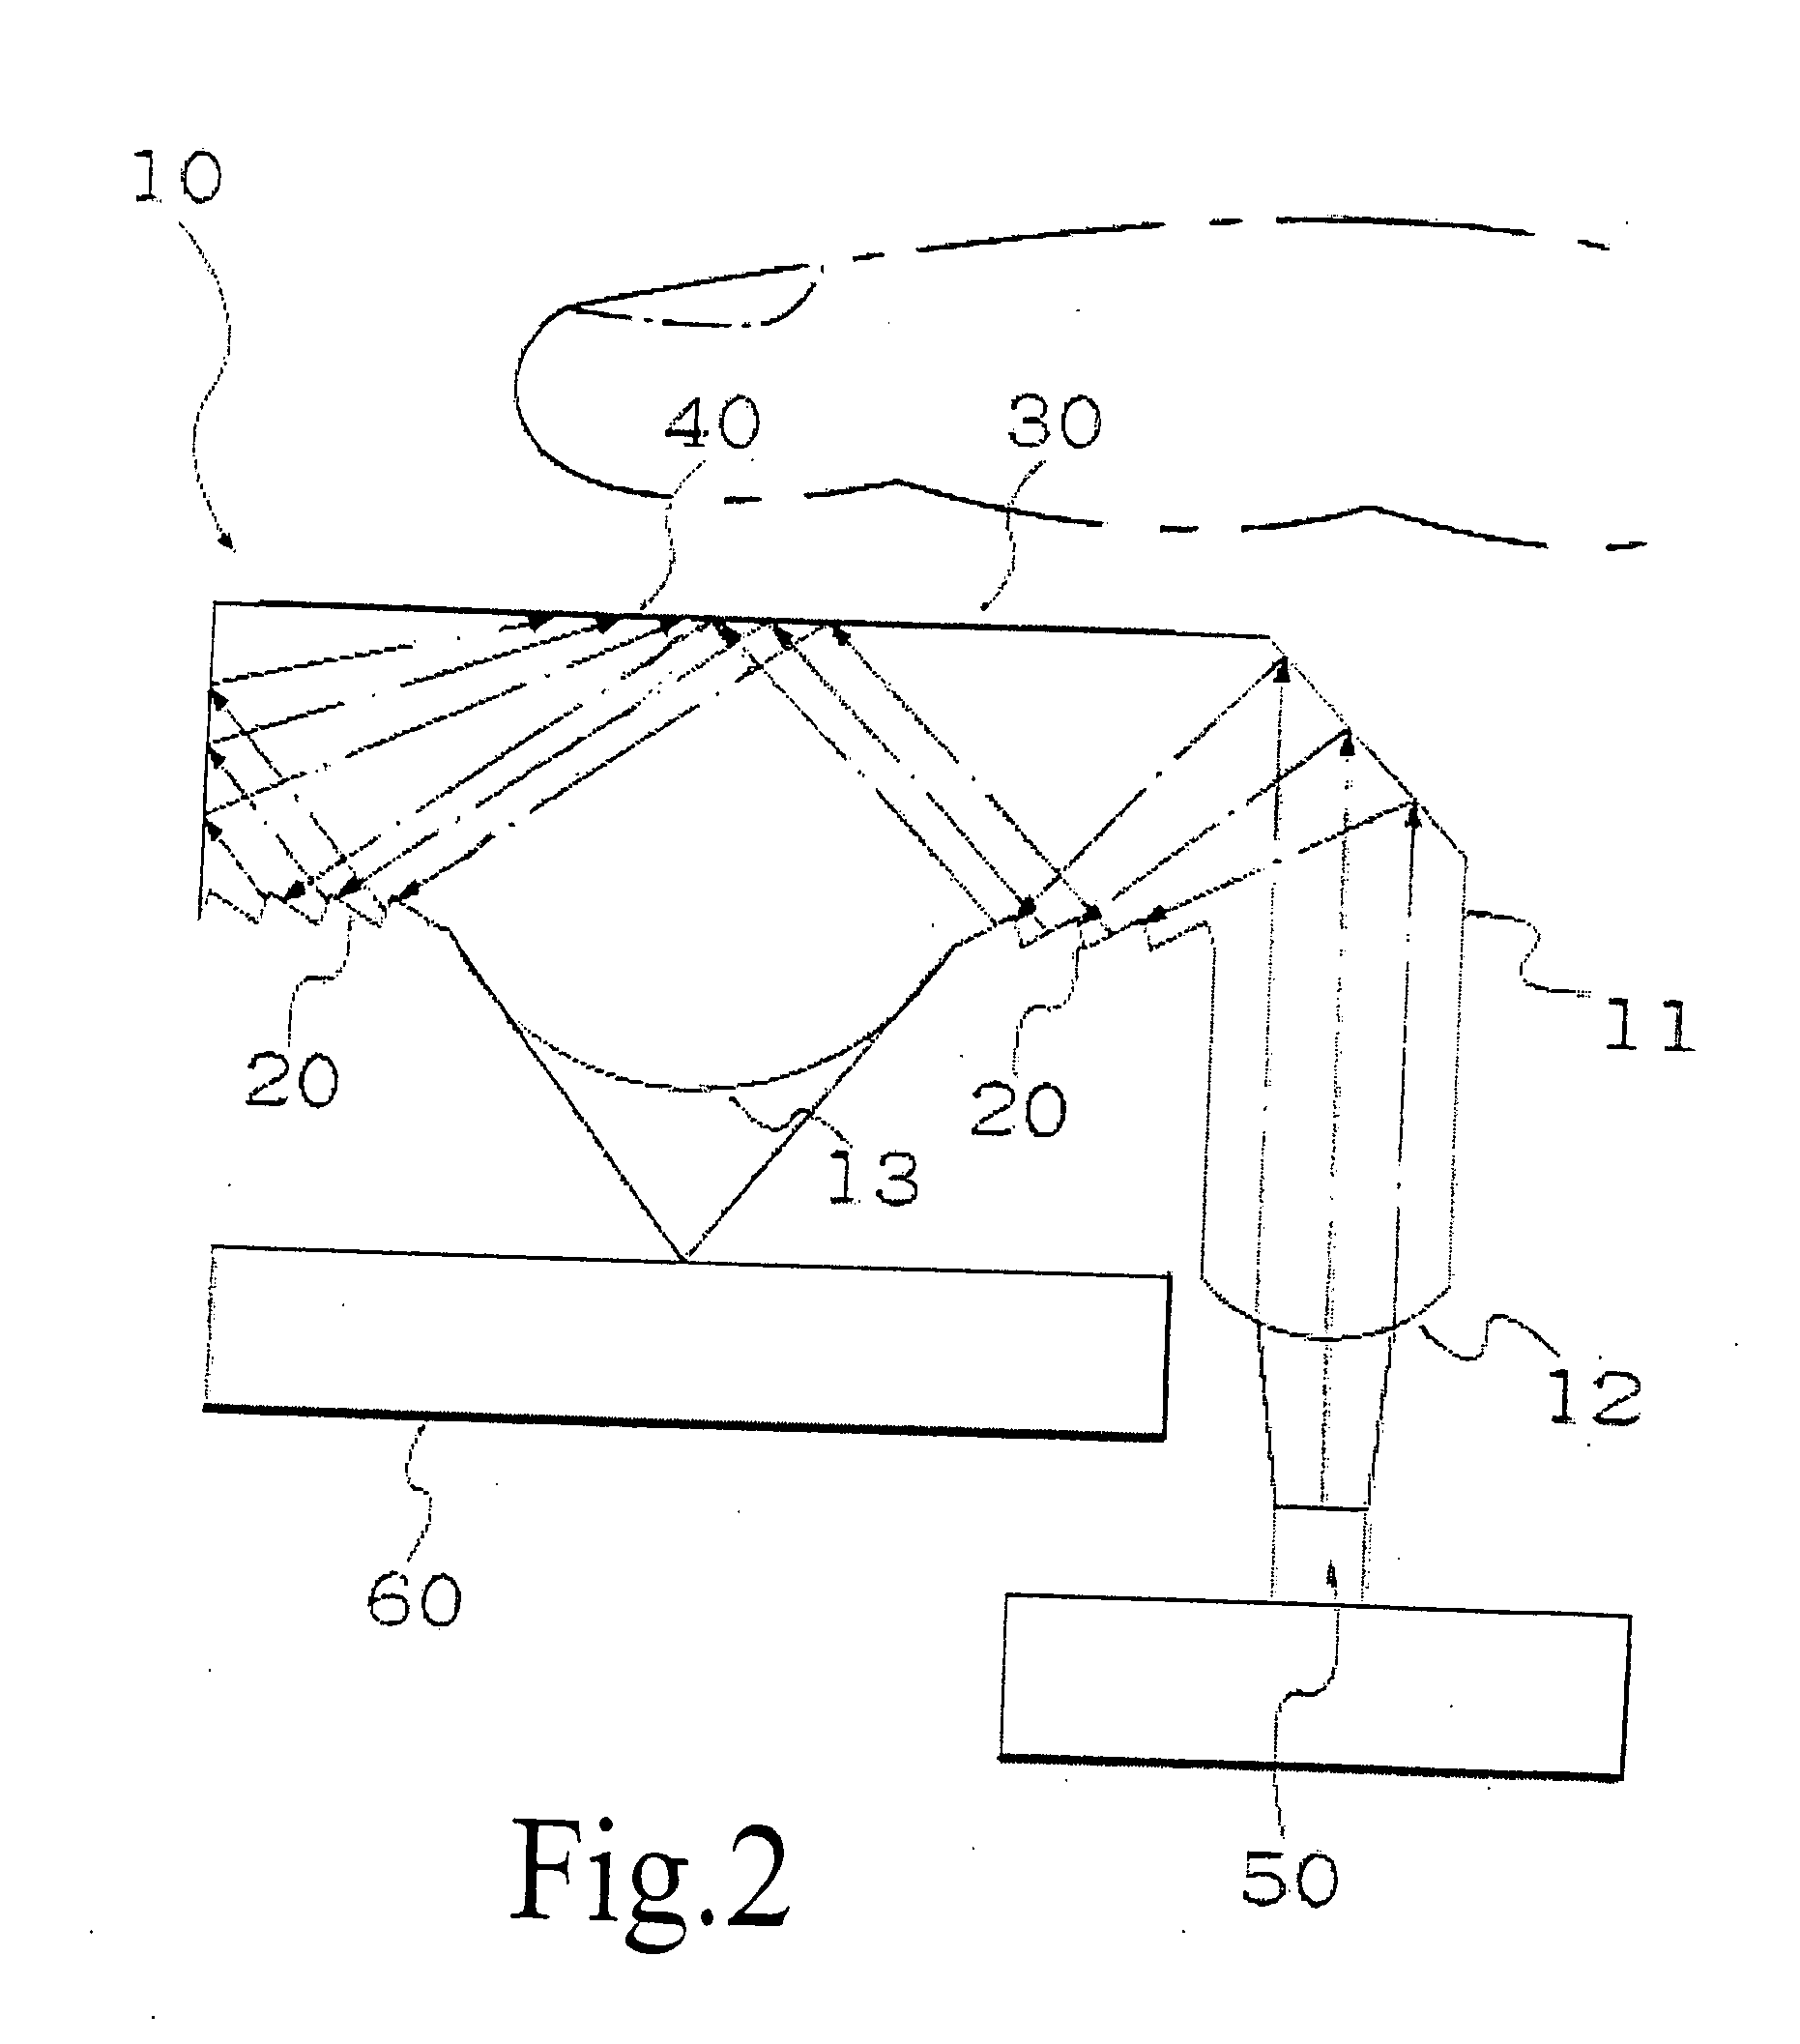 Controller of Contact Sensing Type Using Optical Principle for Controlling a Pointer on a Display Screen